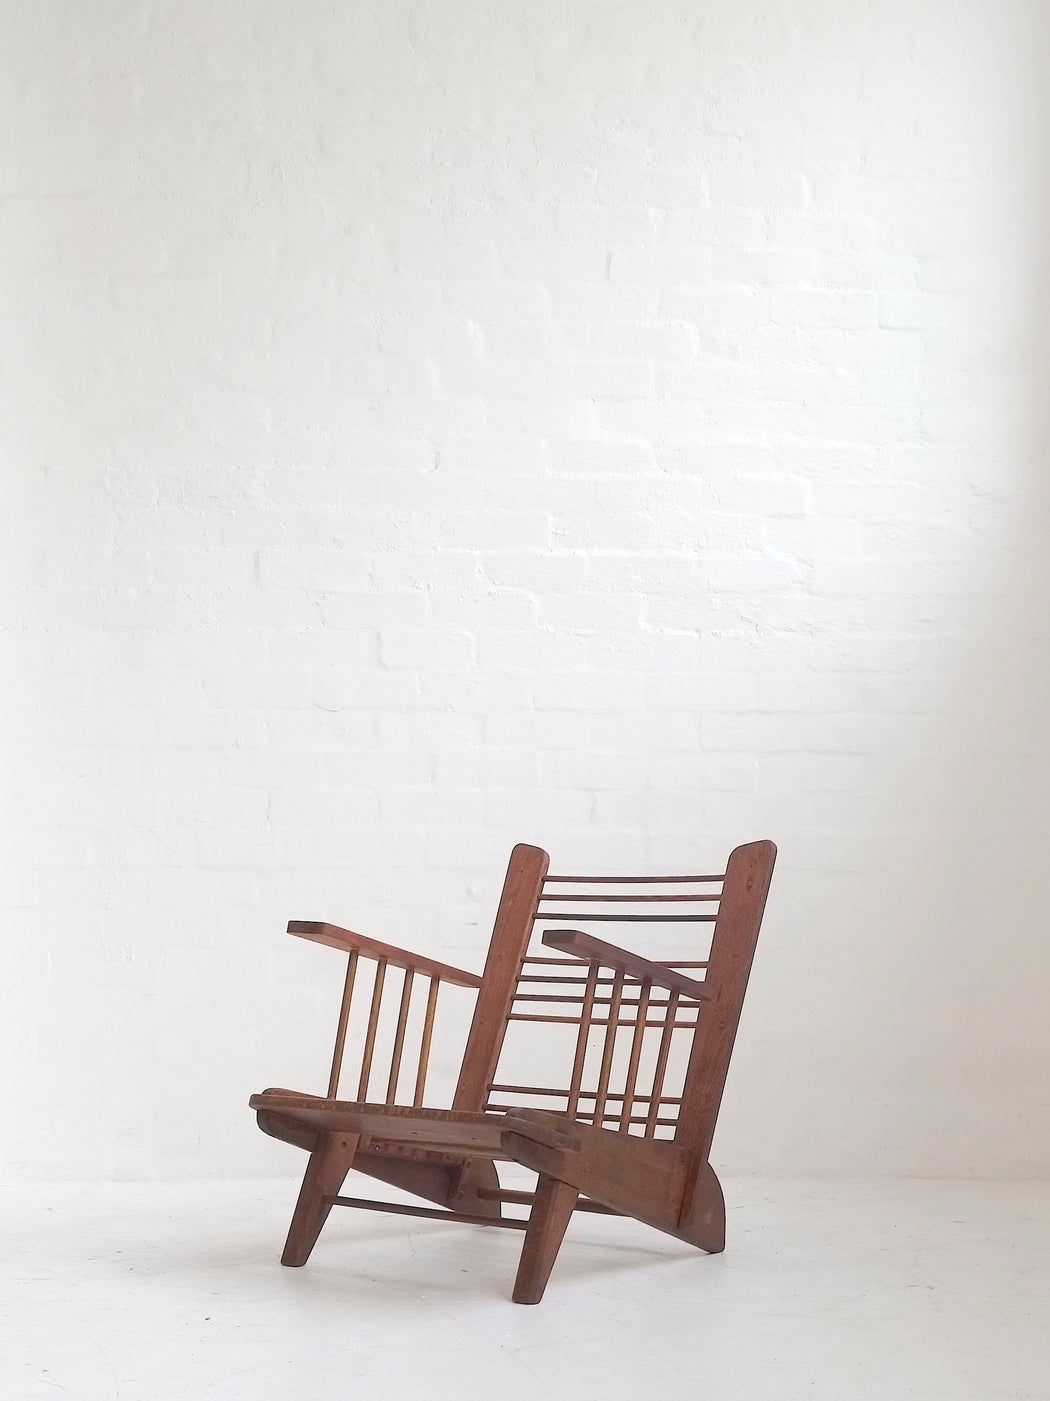 Fred Ward Wingback Patterncraft Chair - Pattern No.7